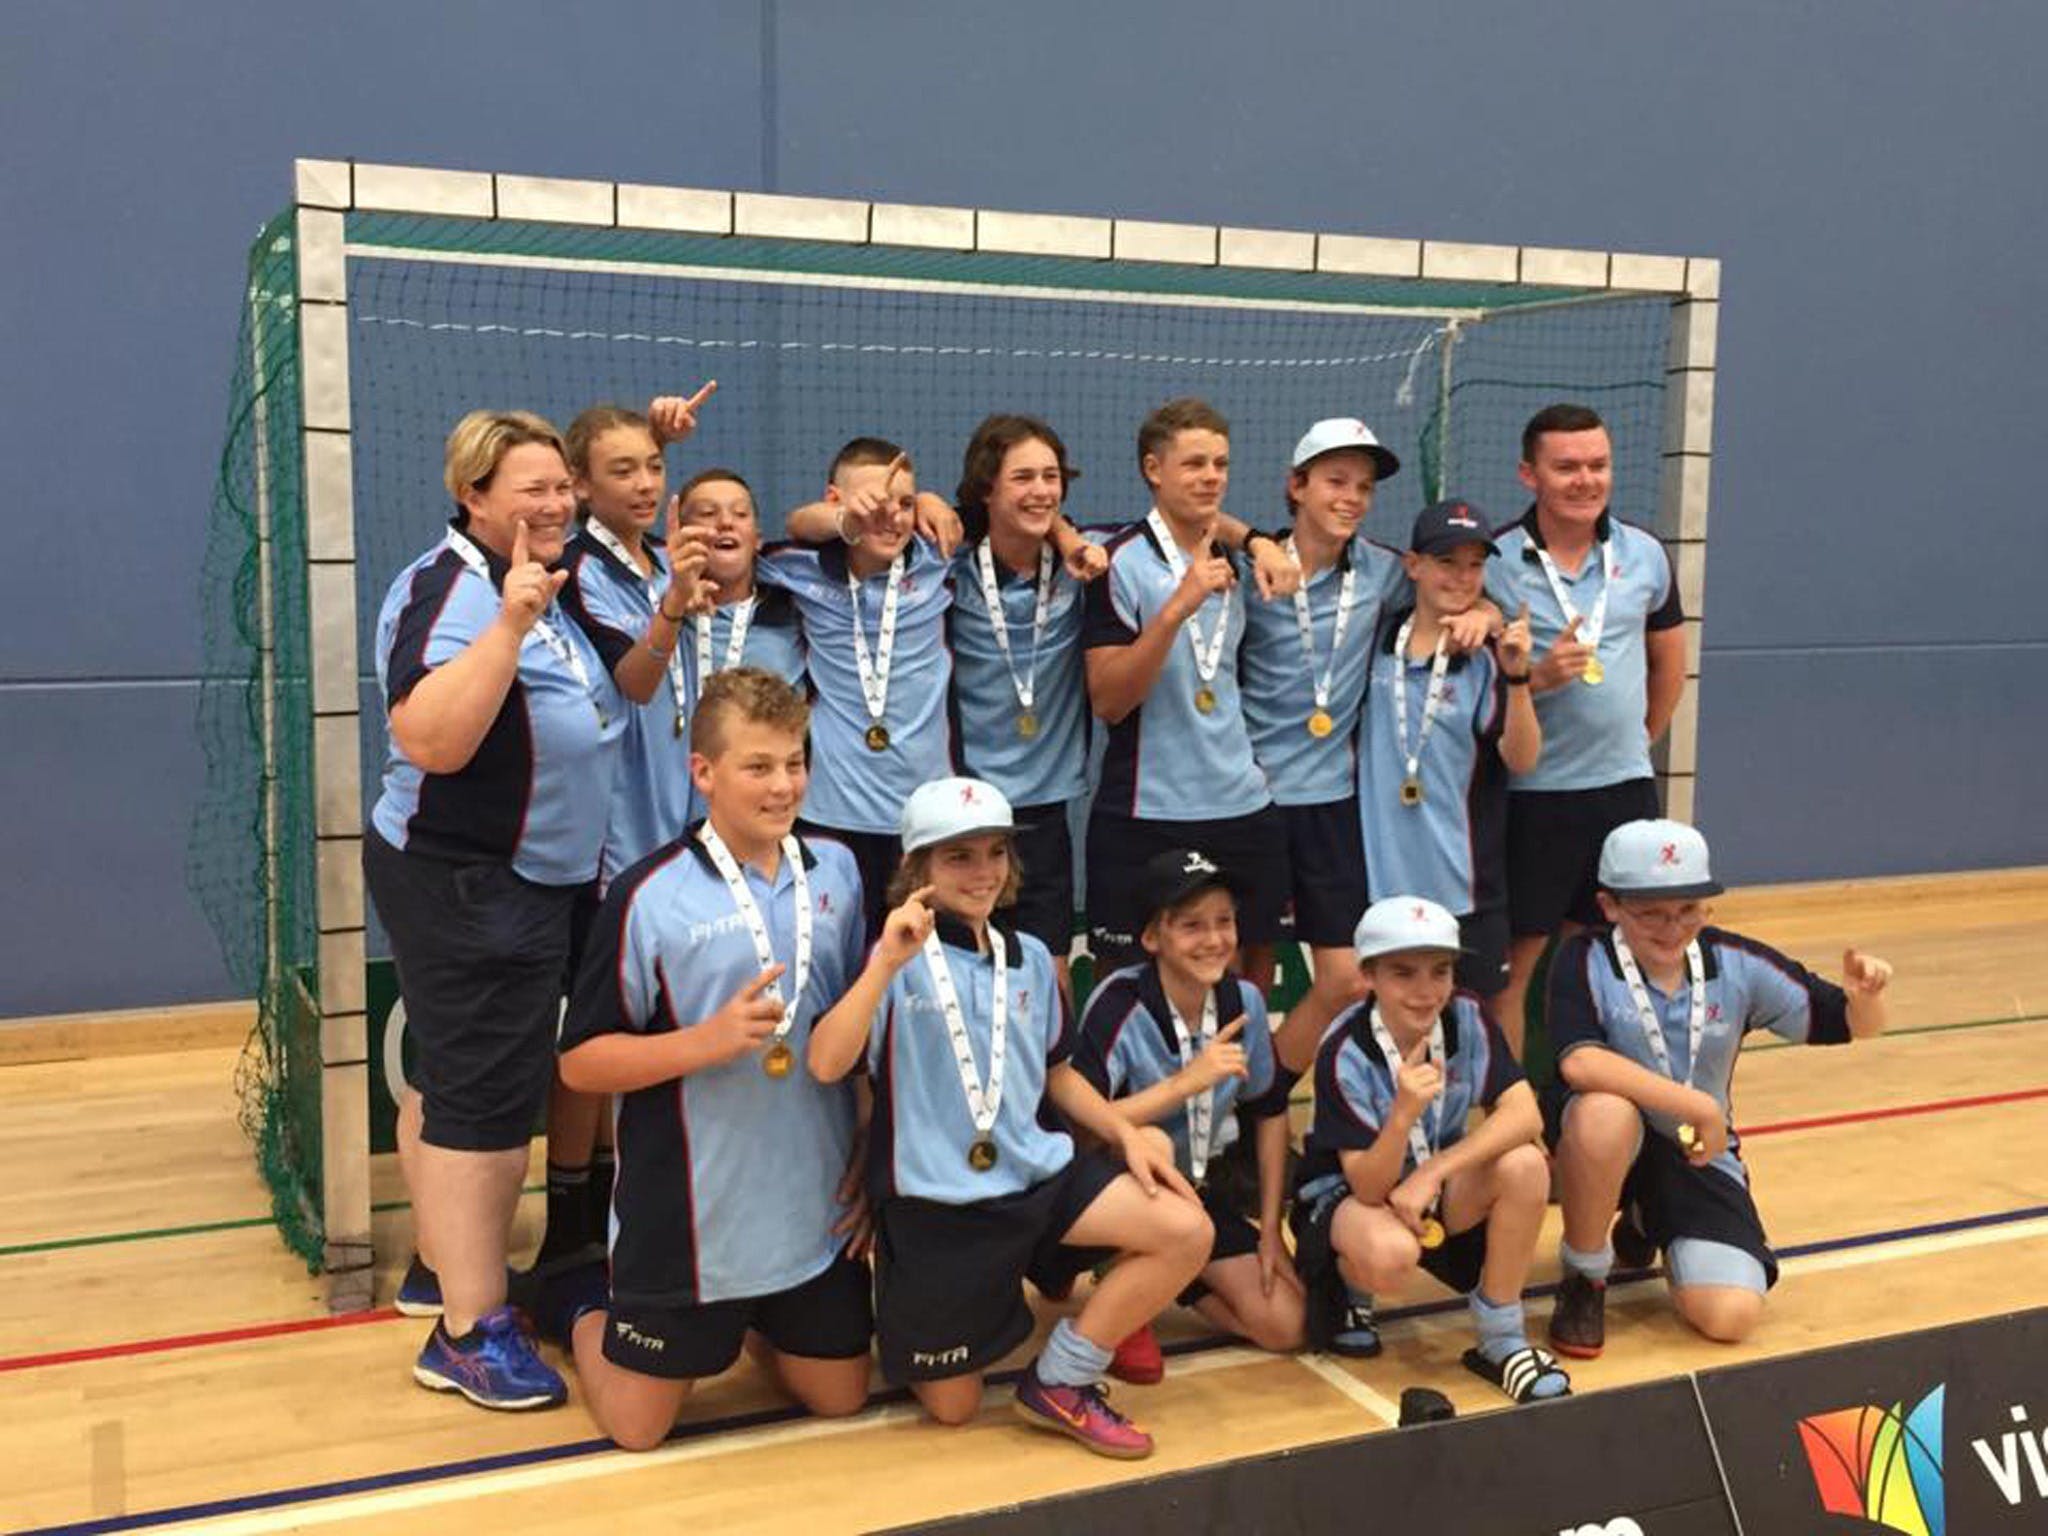 Hockey NSW Indoor State Championship  Under 18 Boys - Accommodation Bookings